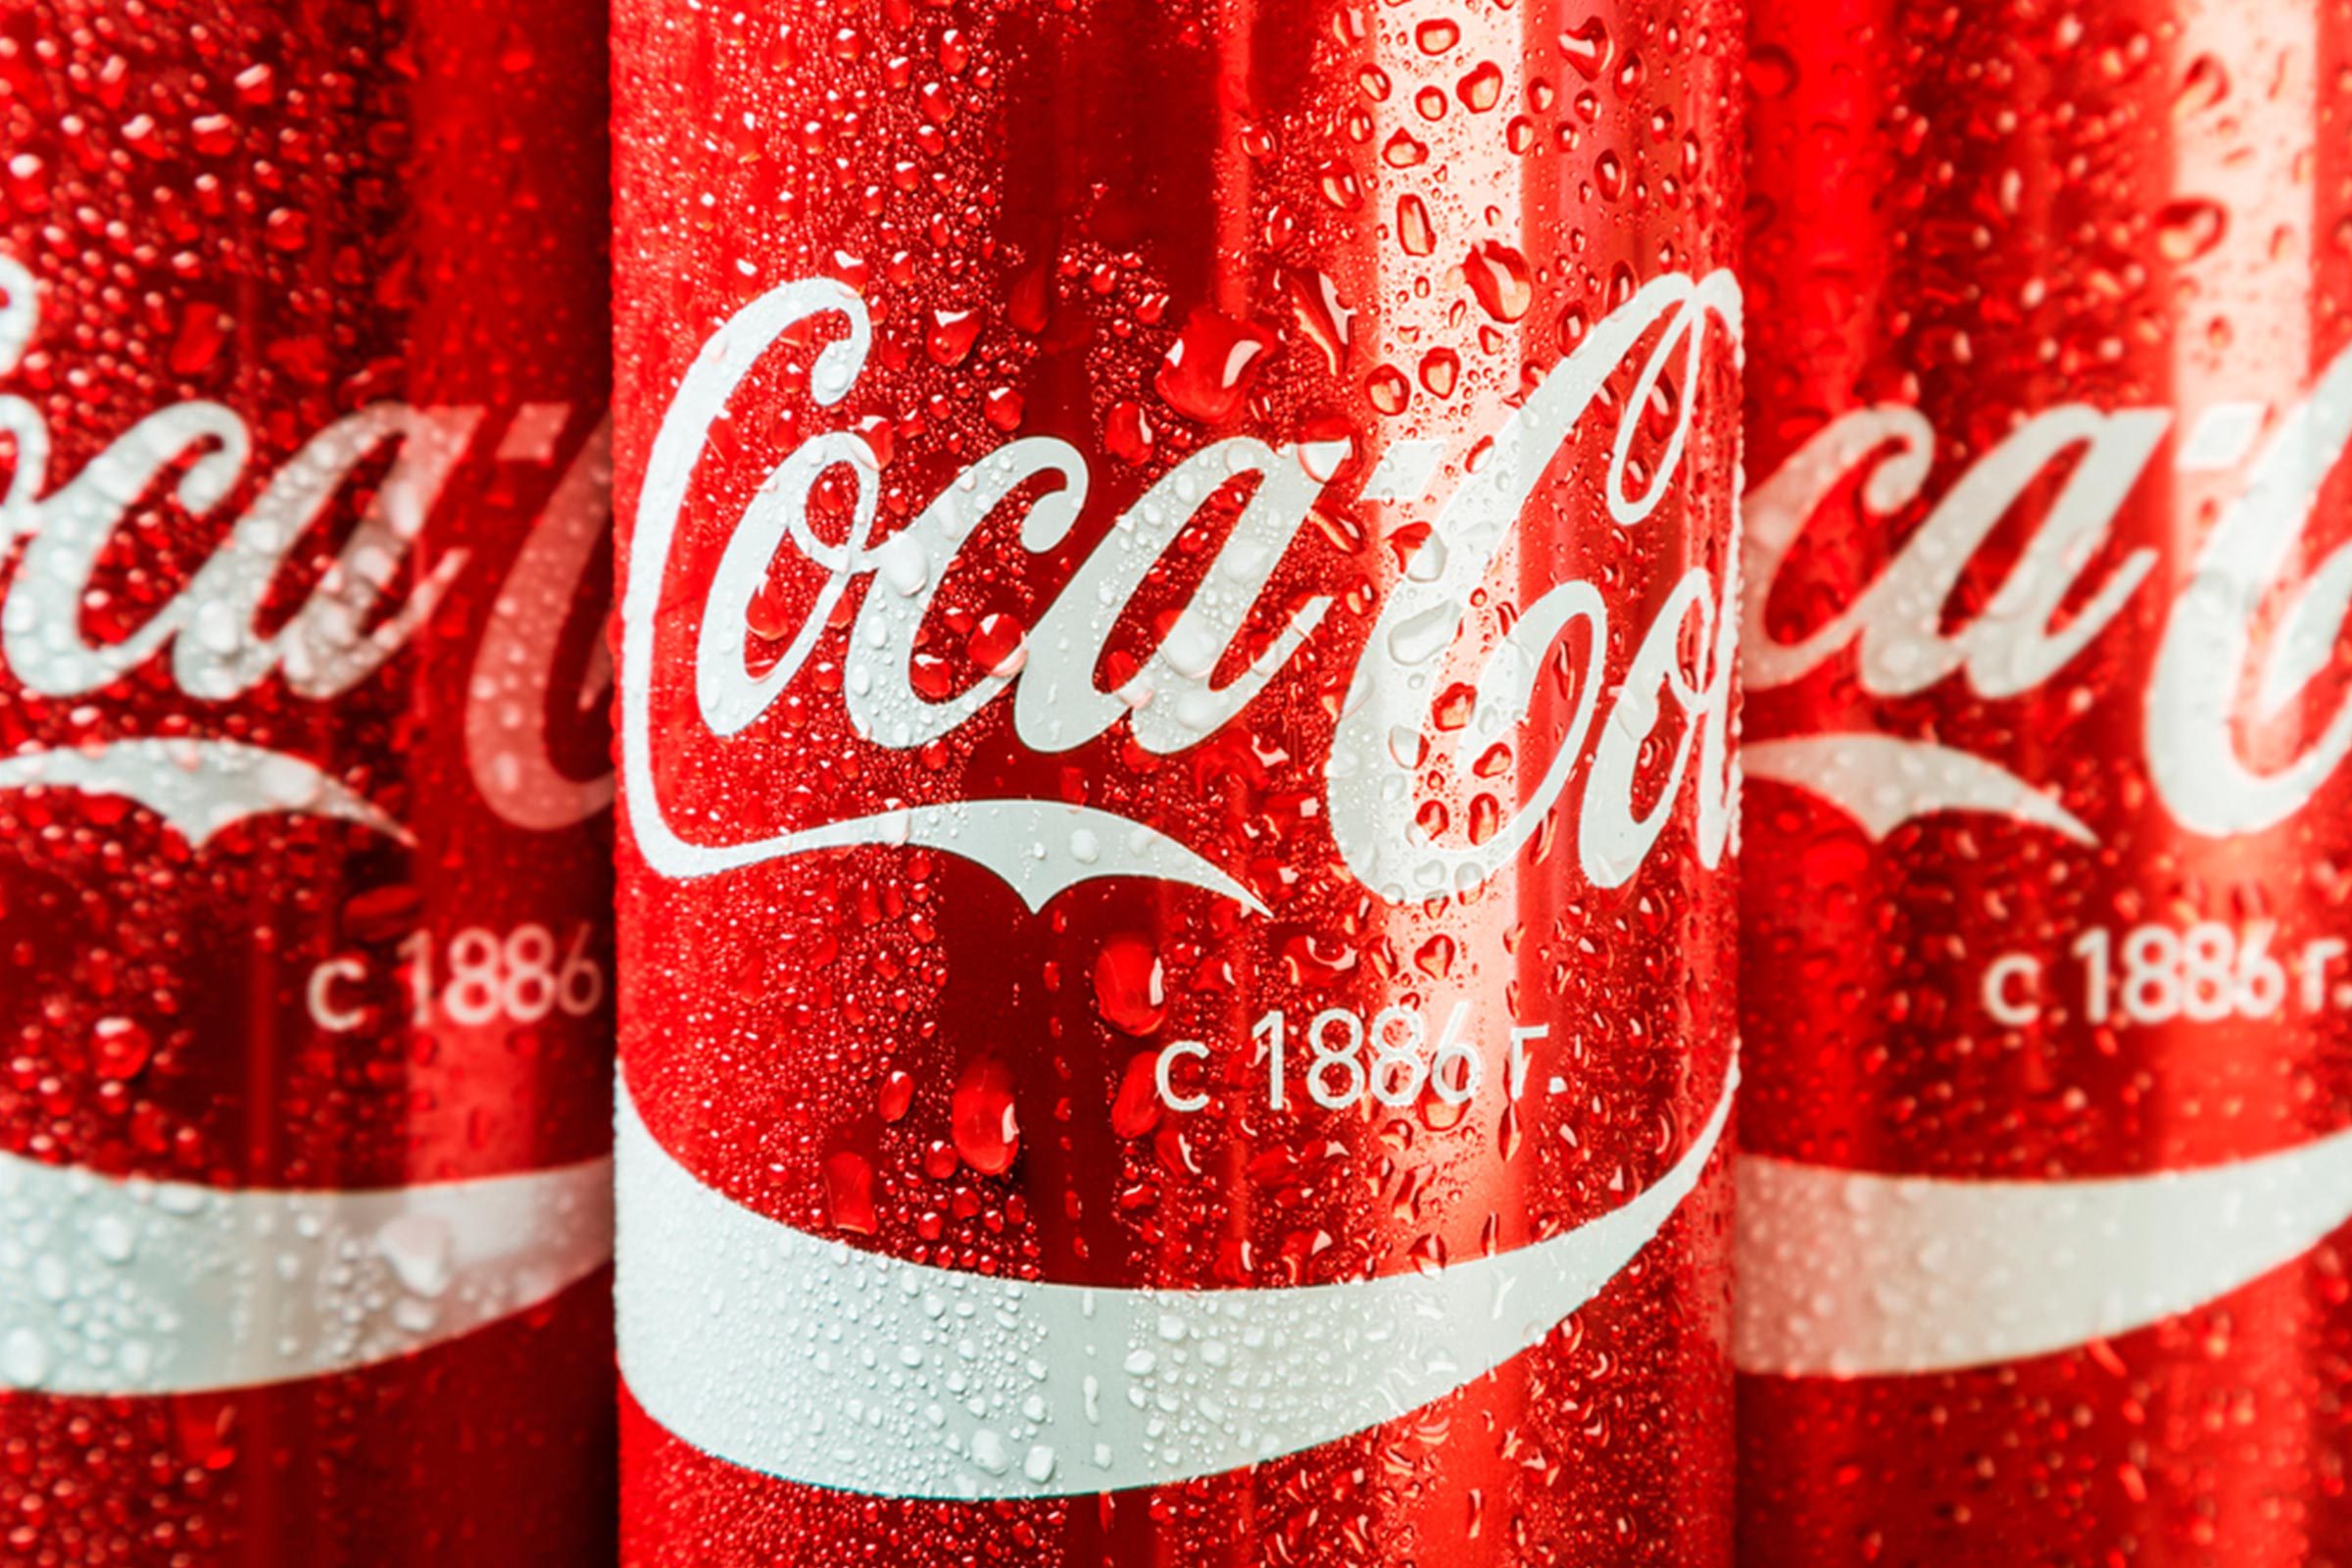 <p>The Coca-Cola formula even extends into cleaning windows. The citric acid works like other cleaning products with citrus fruit to remove smudges and streaks from windows.</p>